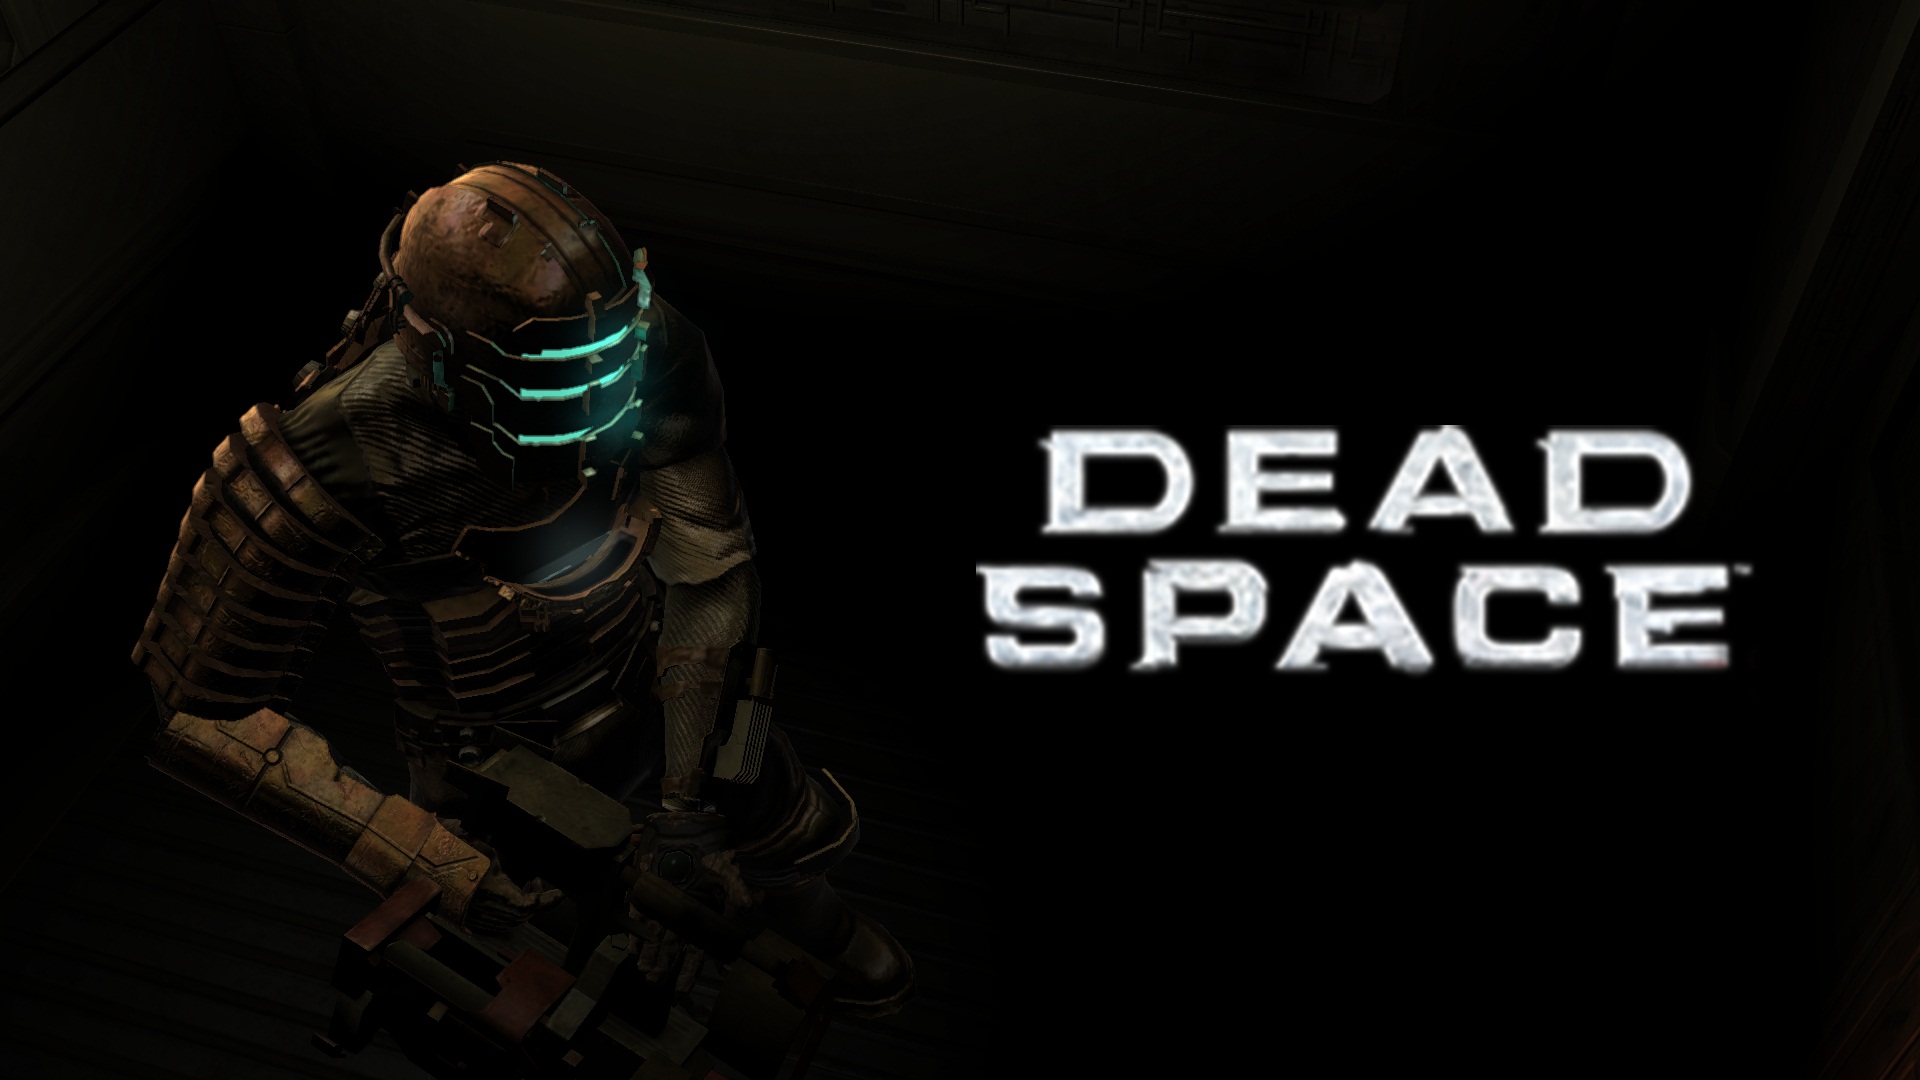 Is Dead Space Gonna Make A Comeback Mxdwn Games